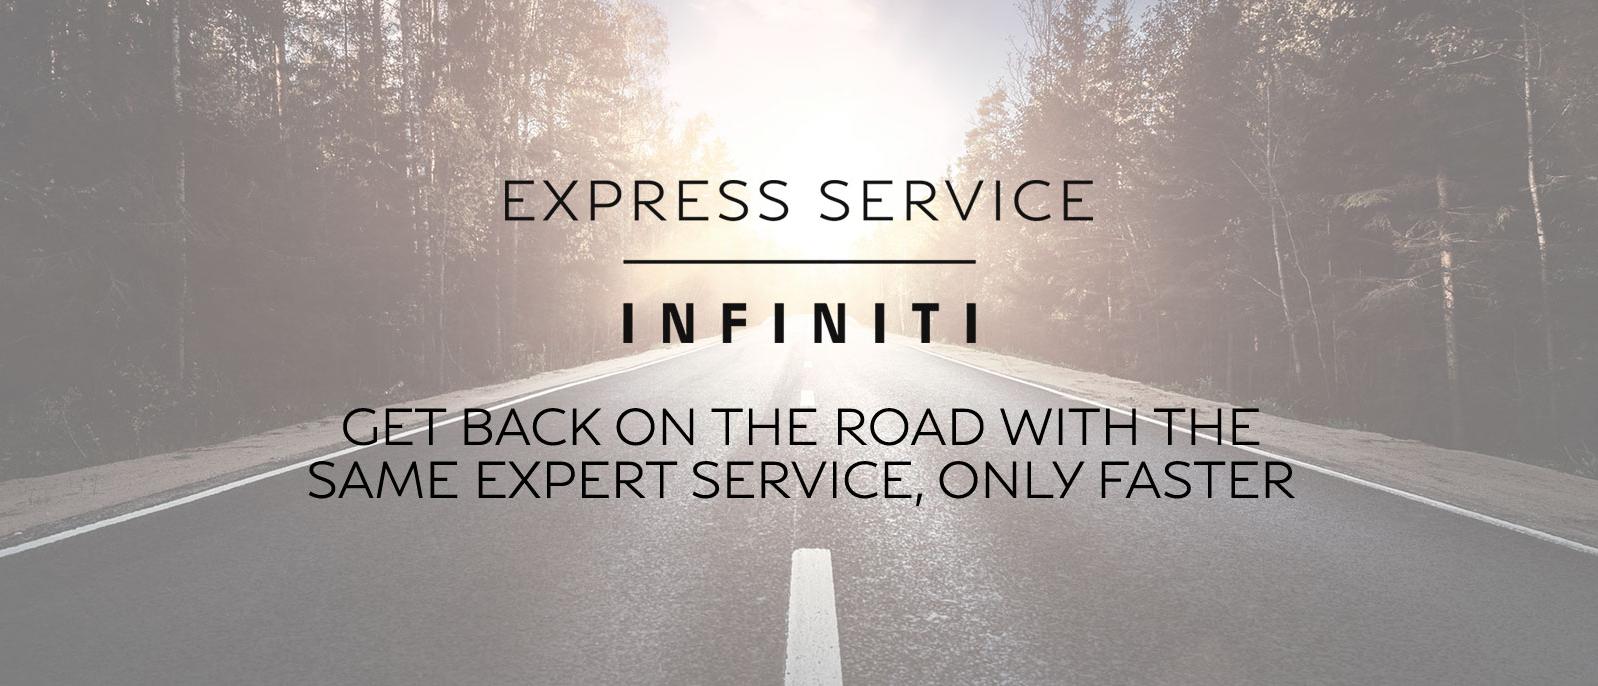 Express Service - Get back on the road with the same expert service, only faster